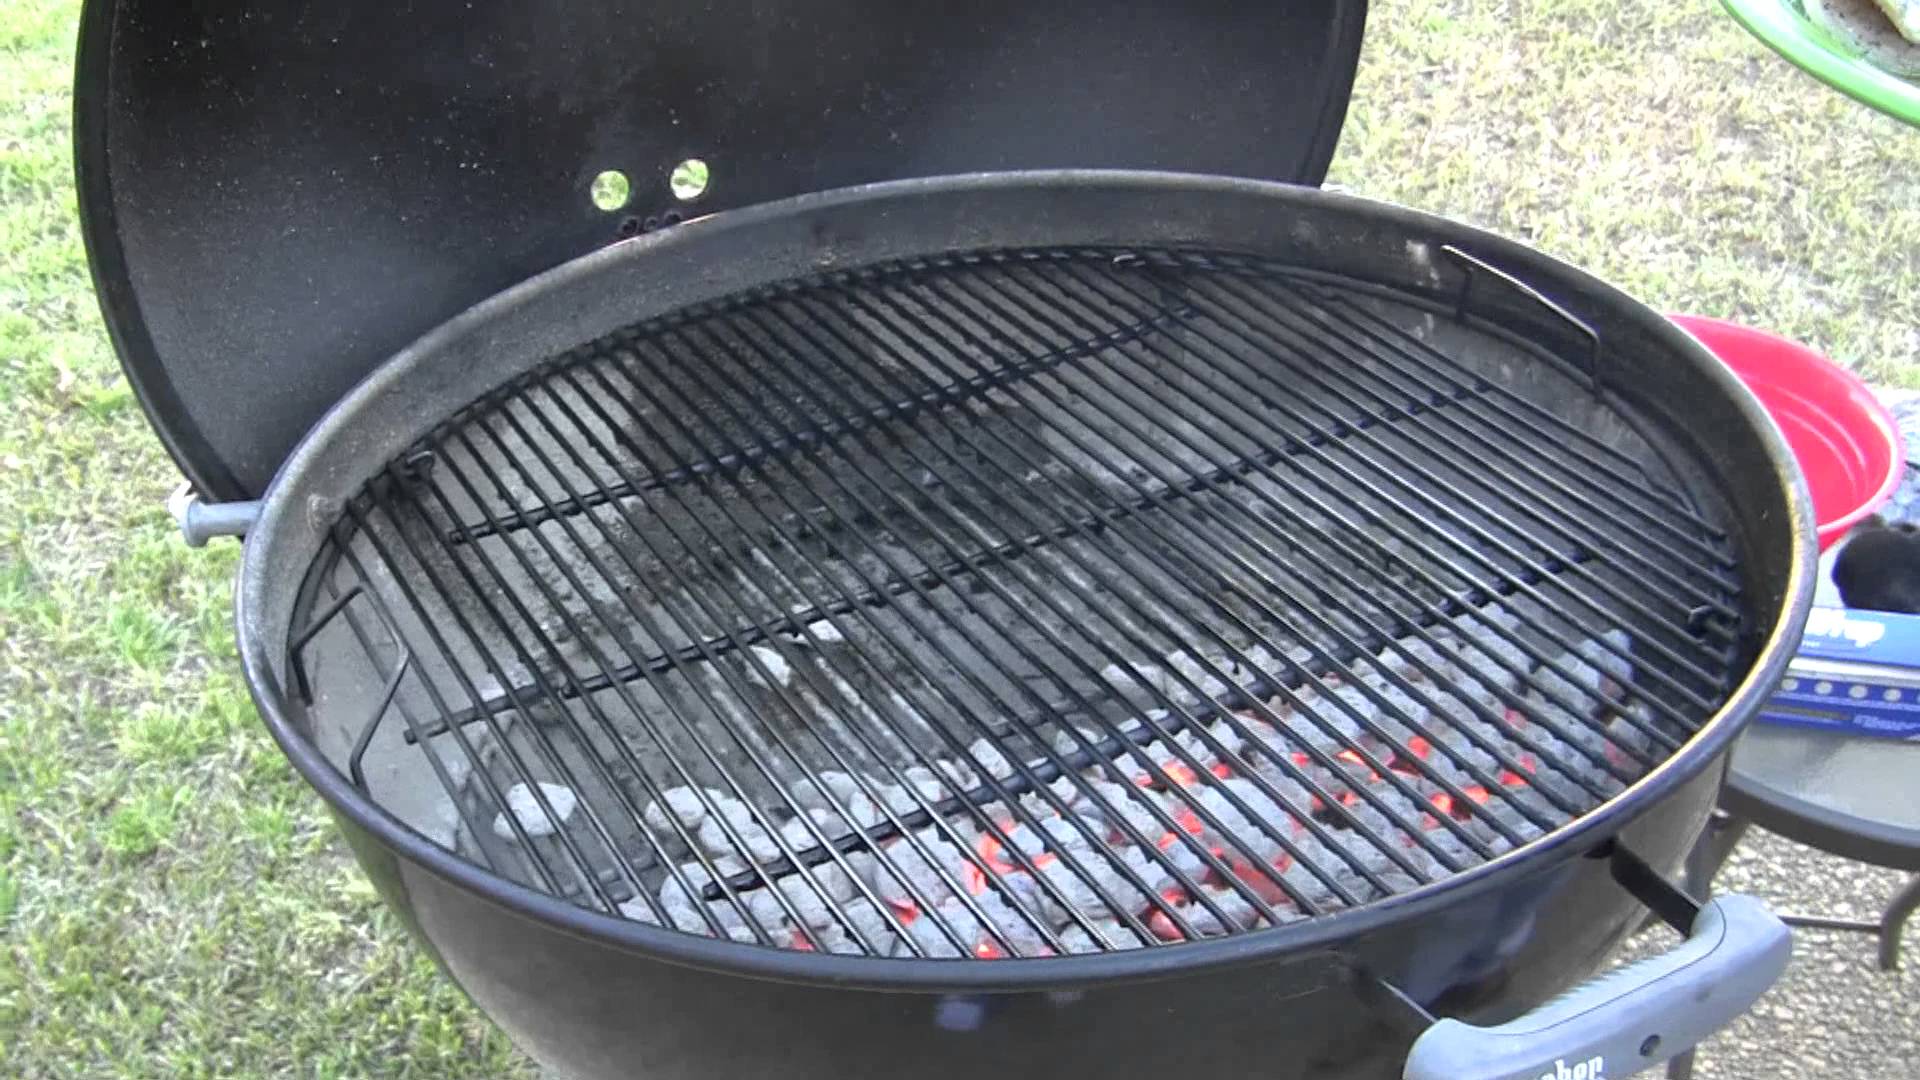 Cooking Fish on the Weber Charcoal Grill using the Direct Method ...